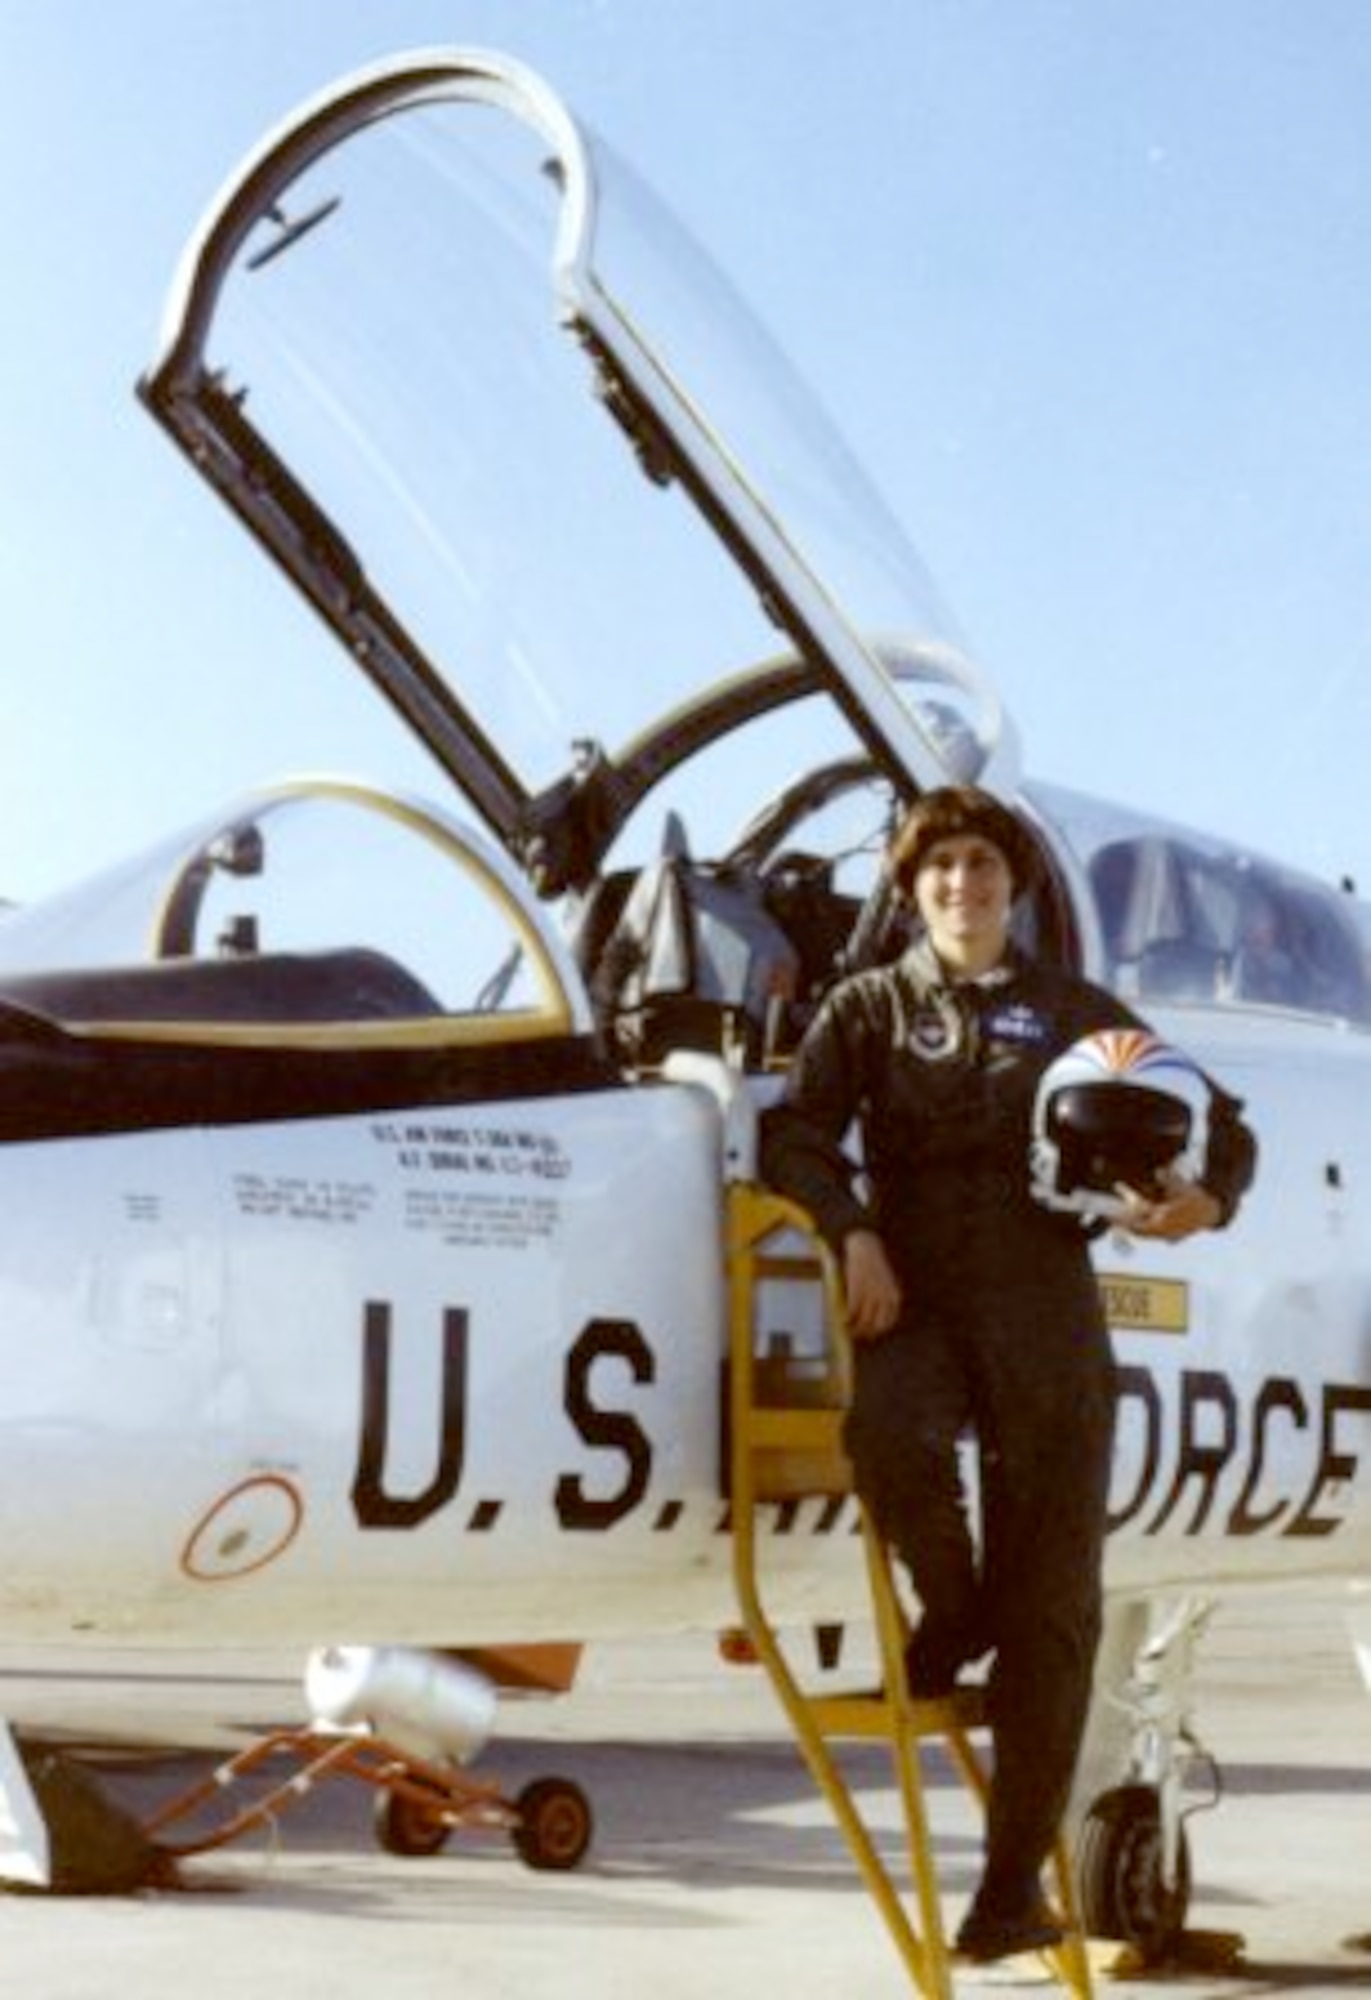 Col. Kathleen Conley, poses next to her aircraft. was a 1980 distinguished graduate of the Air Force Academy and the Academy's first female graduate. (Courtesy Photo)